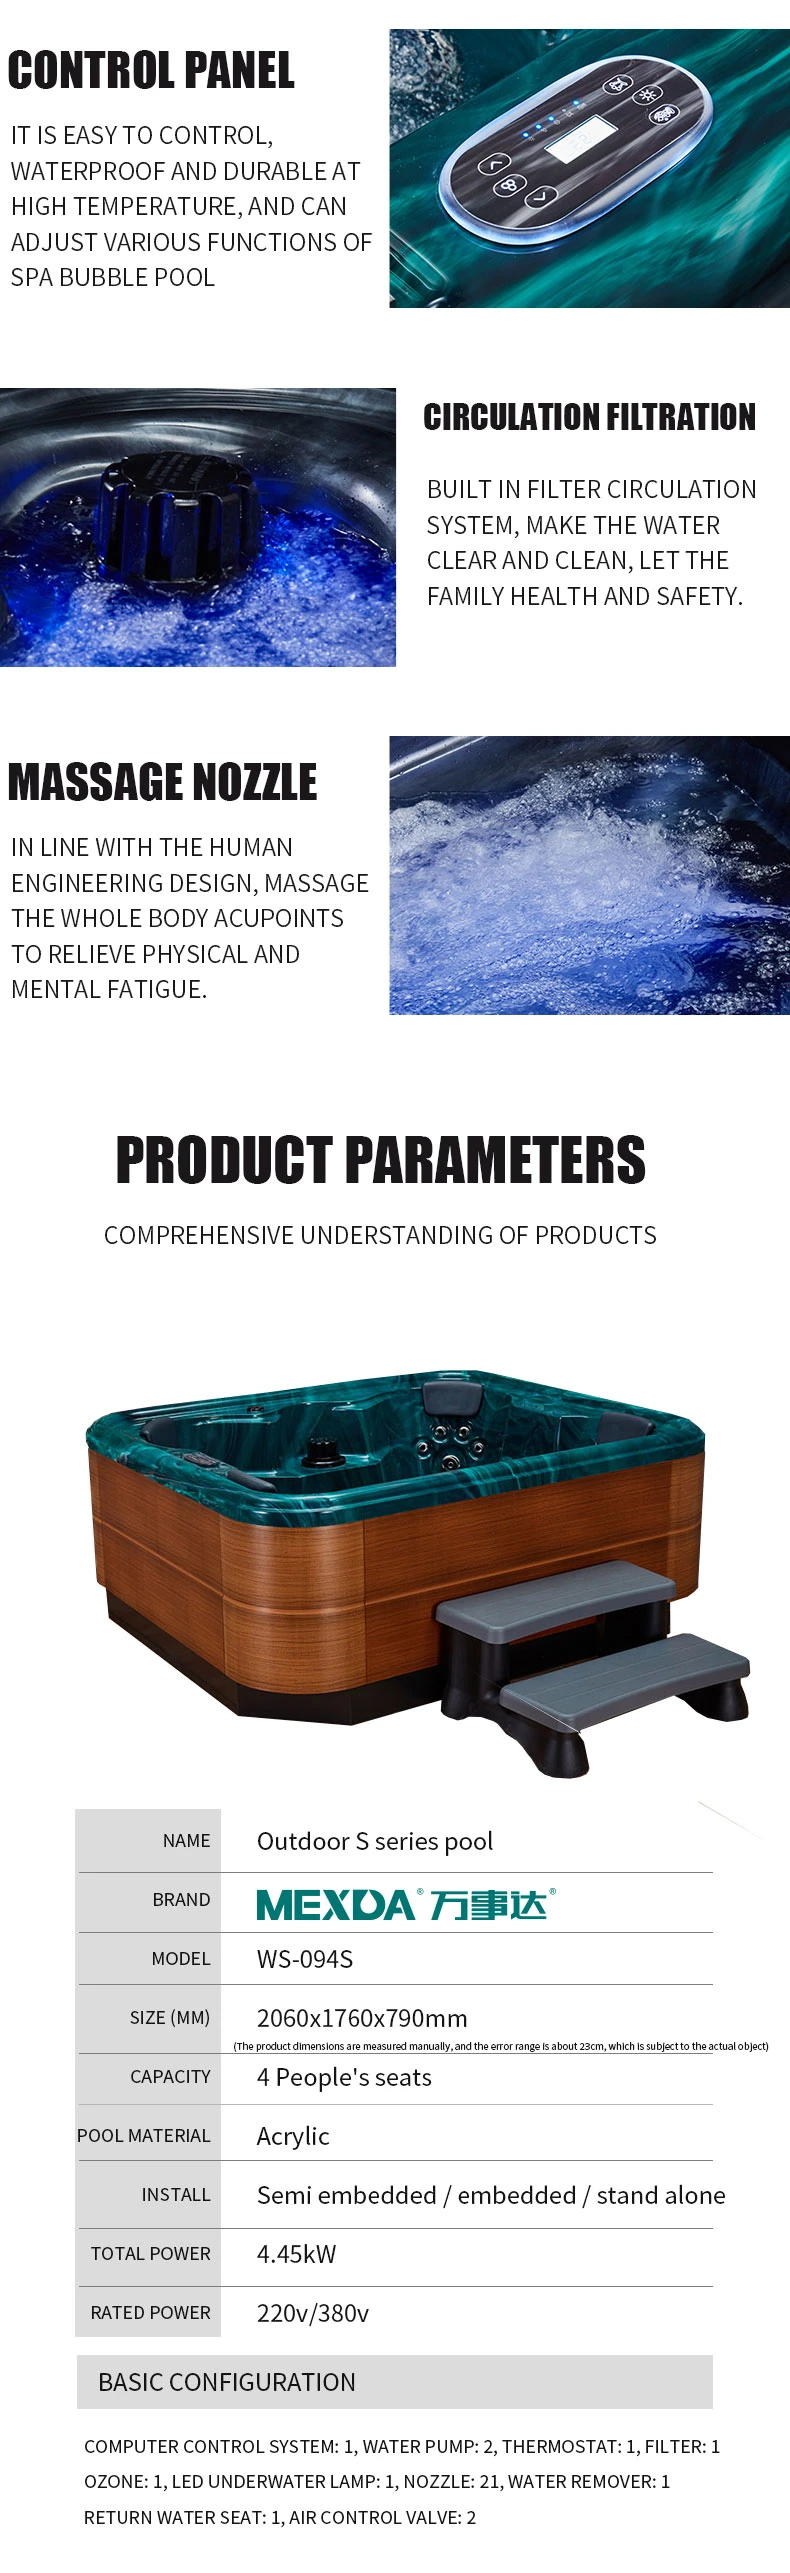 2021 New Hot Tub with Water Pumps and Massage Jets Cozy SPA Bathtub